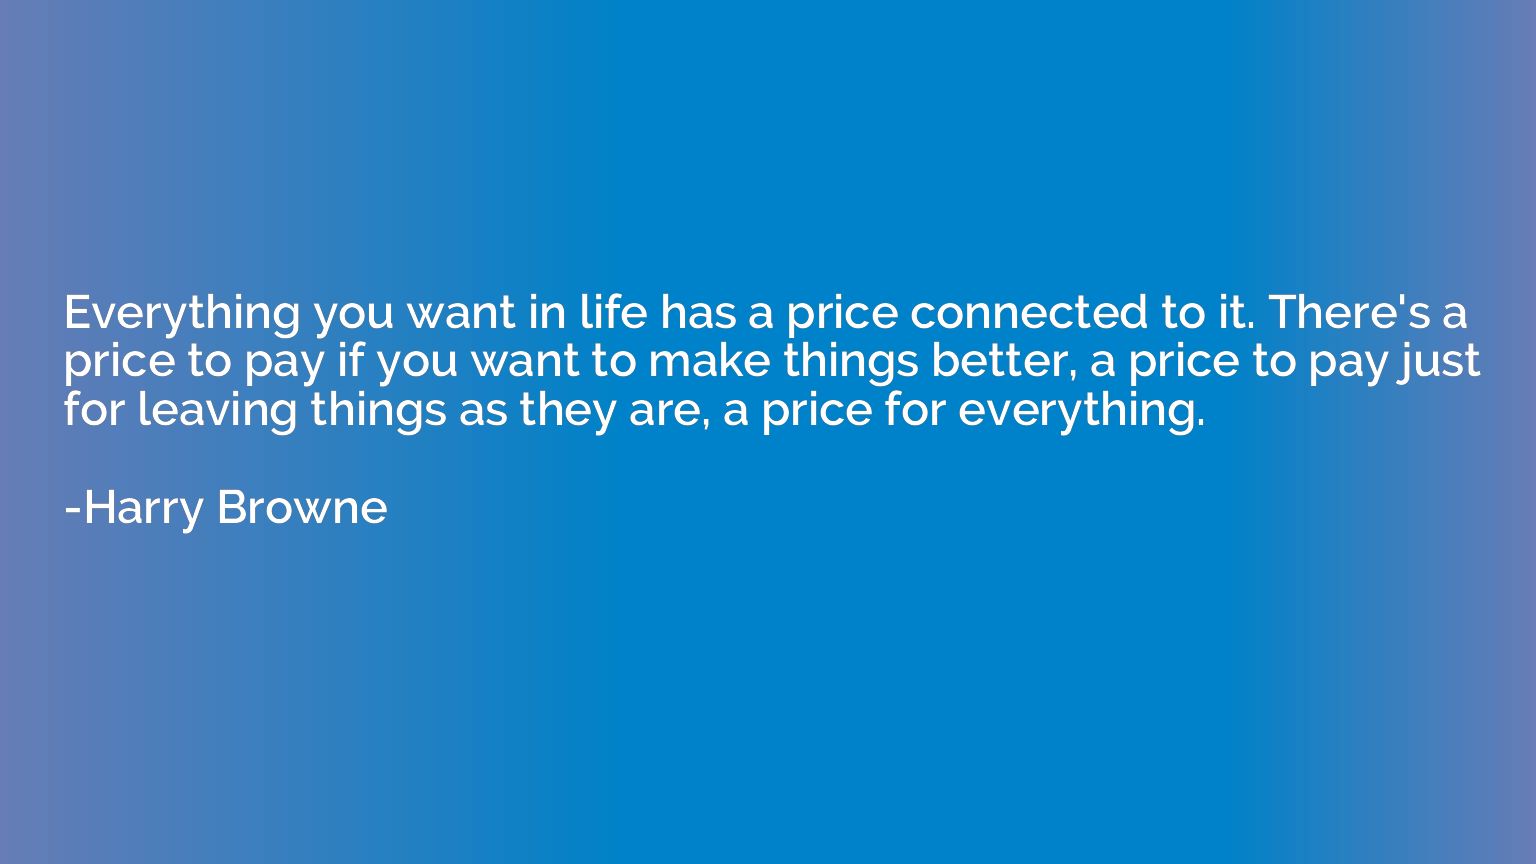 Everything you want in life has a price connected to it. The